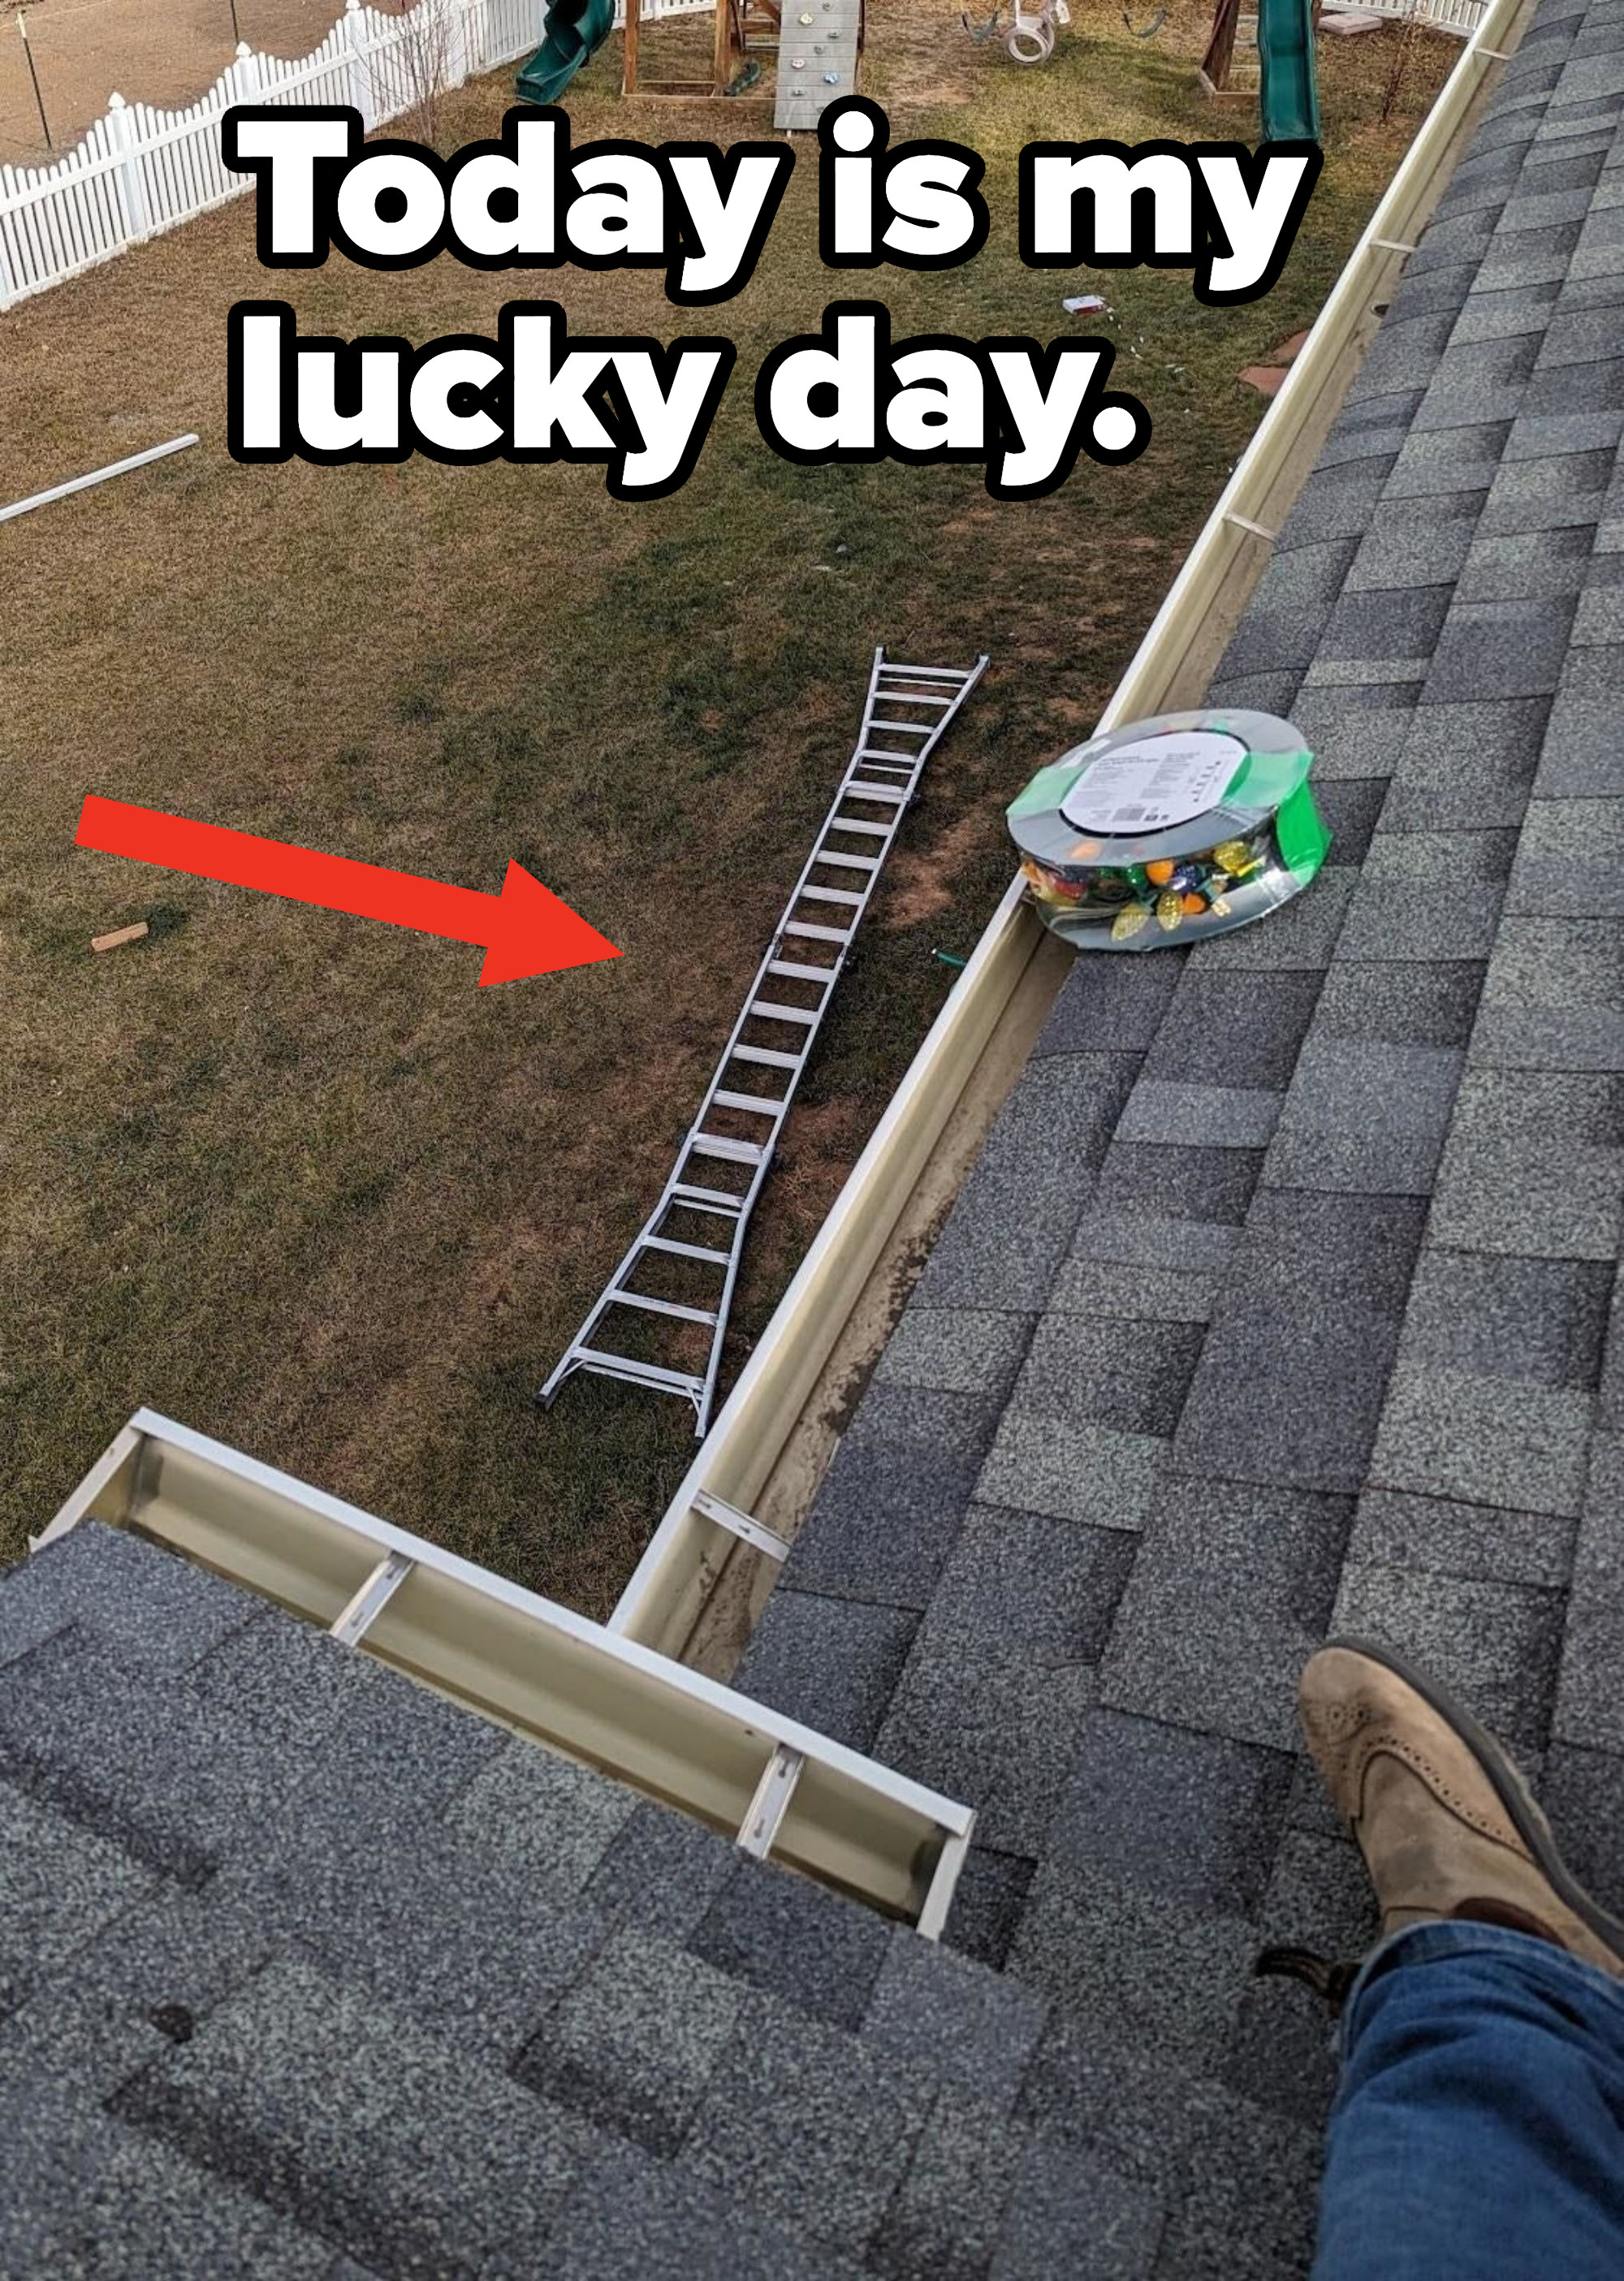 A ladder on the ground while someone is stuck on the roof